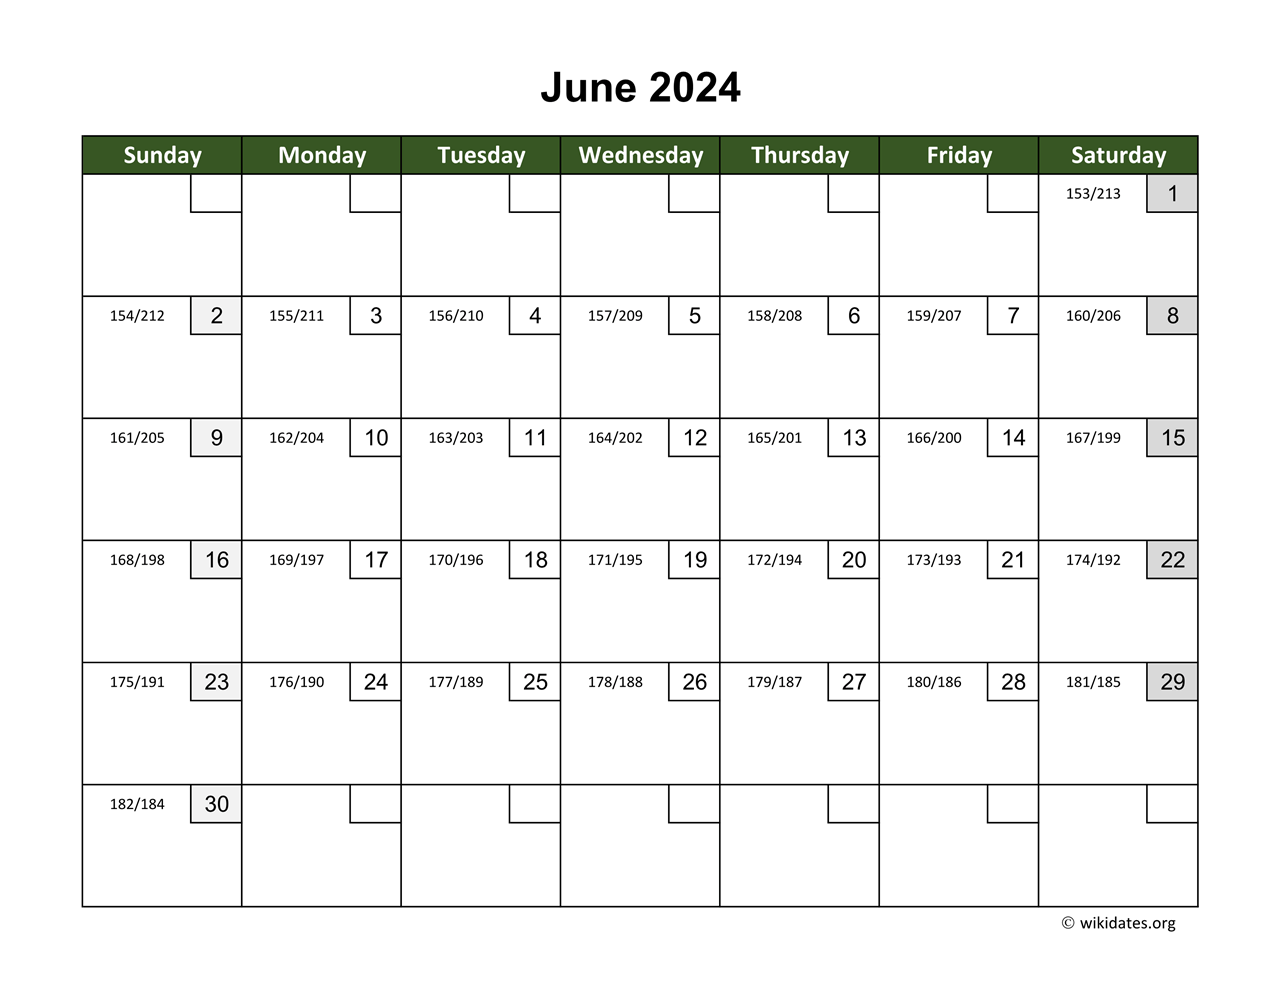 June 2024 Calendar with Day Numbers | WikiDates.org